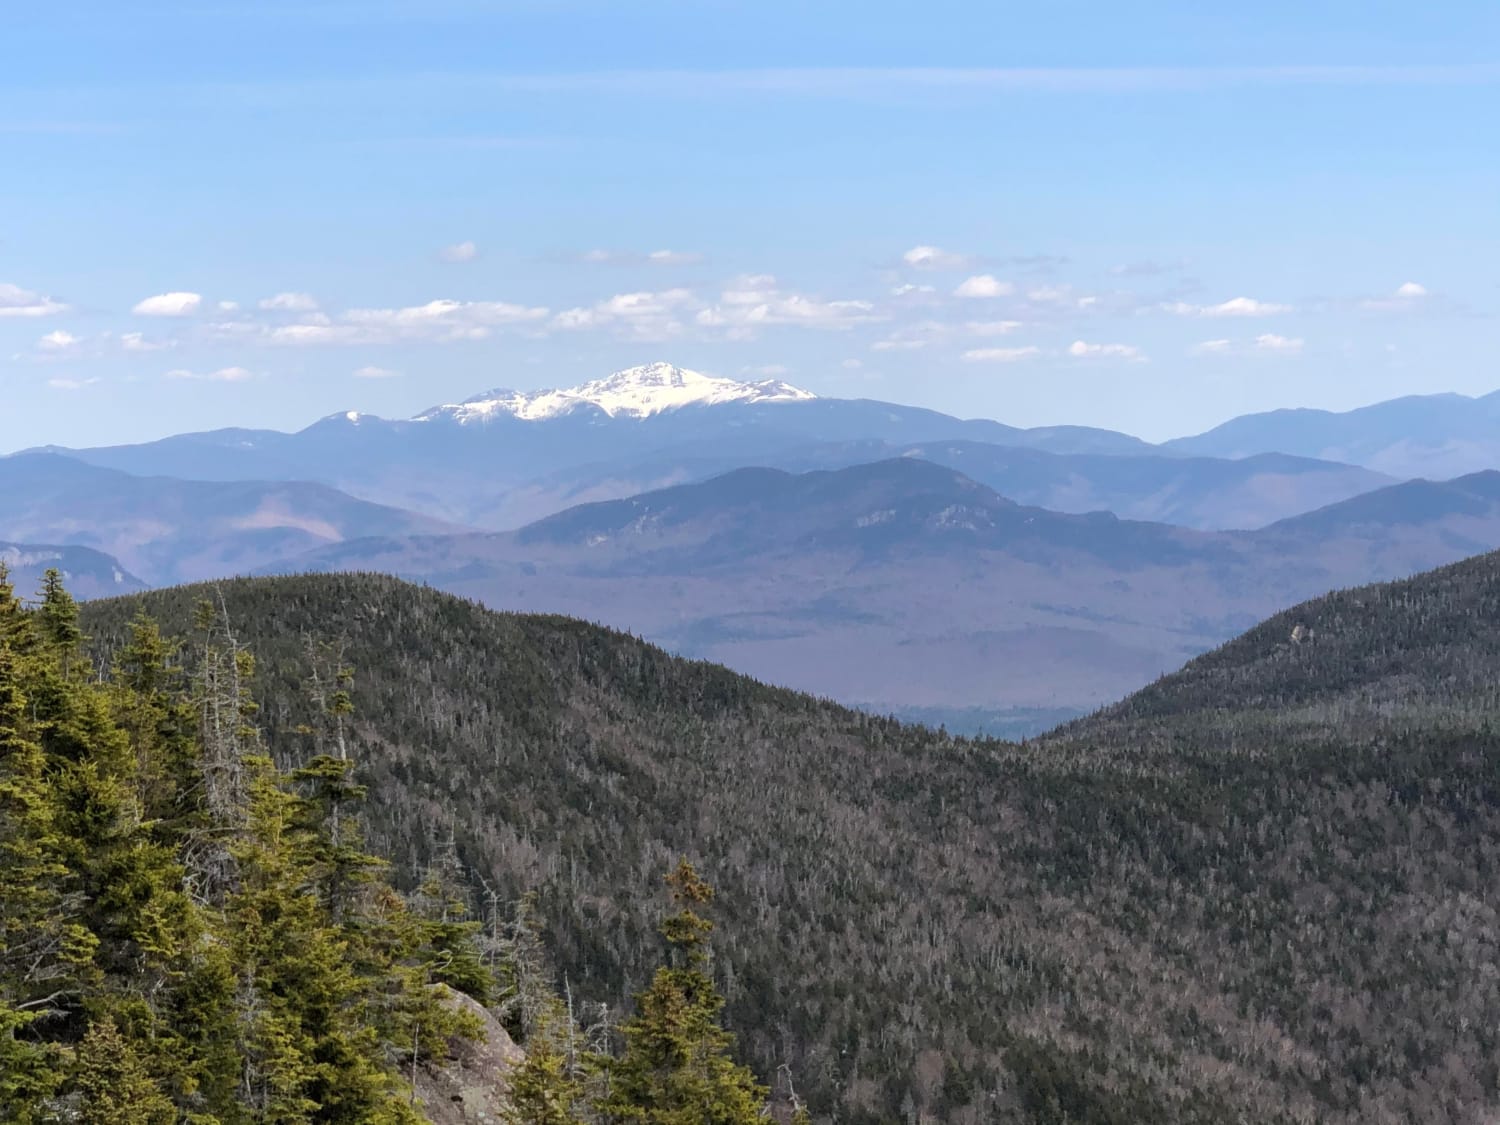 View of Mt Washington from Whiteface; White Mountains, New Hampshire, USA 5/18/20